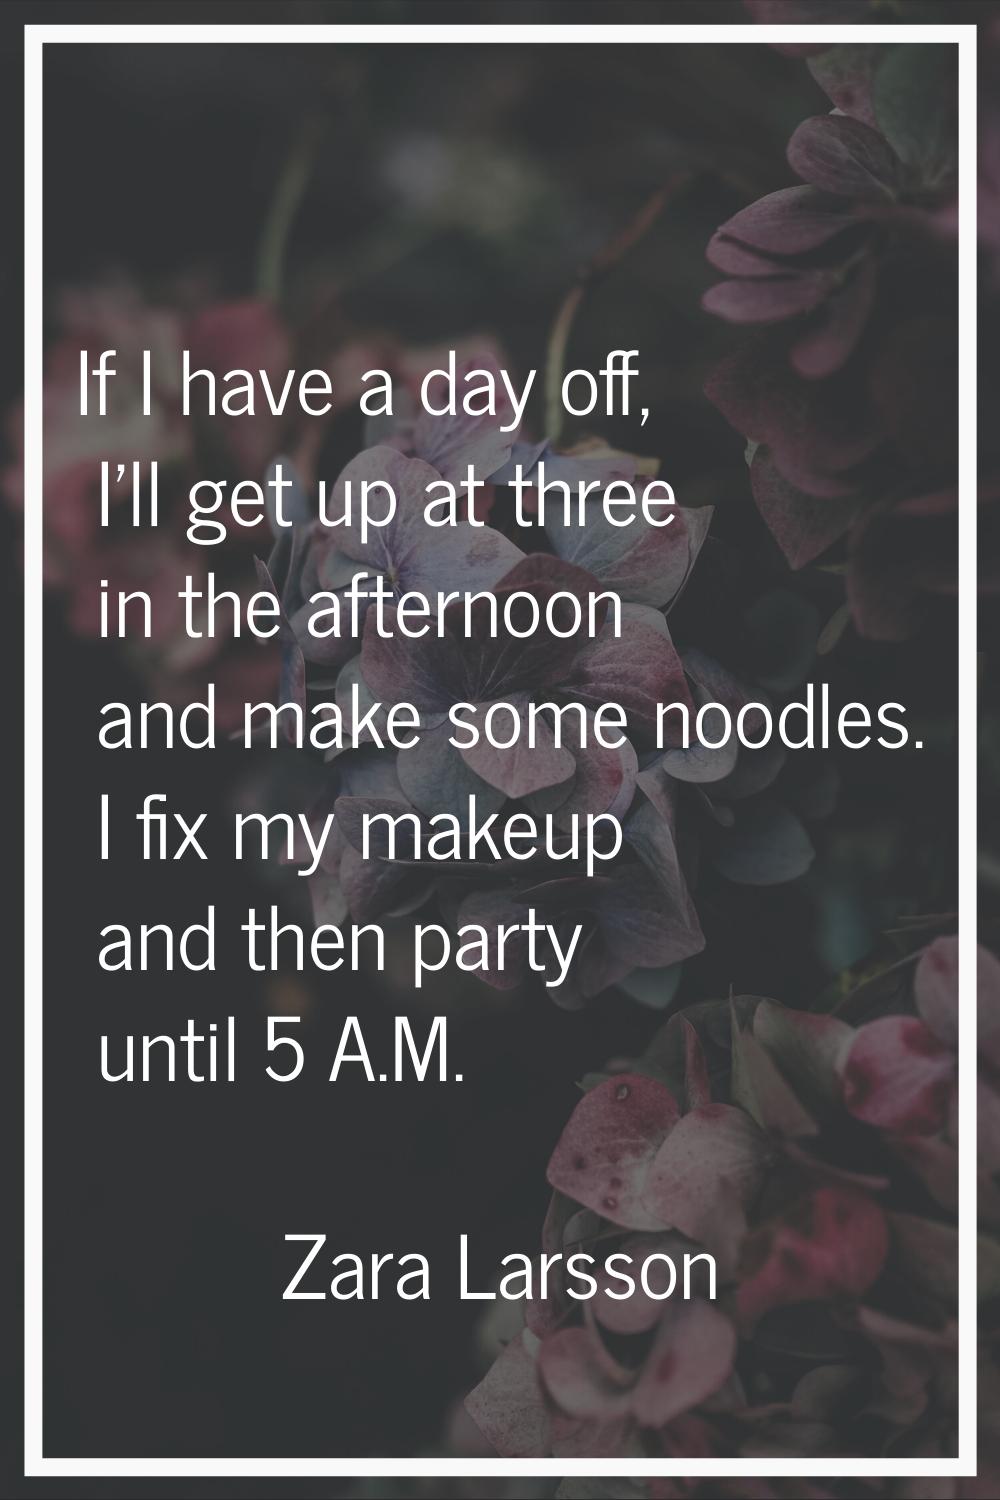 If I have a day off, I'll get up at three in the afternoon and make some noodles. I fix my makeup a